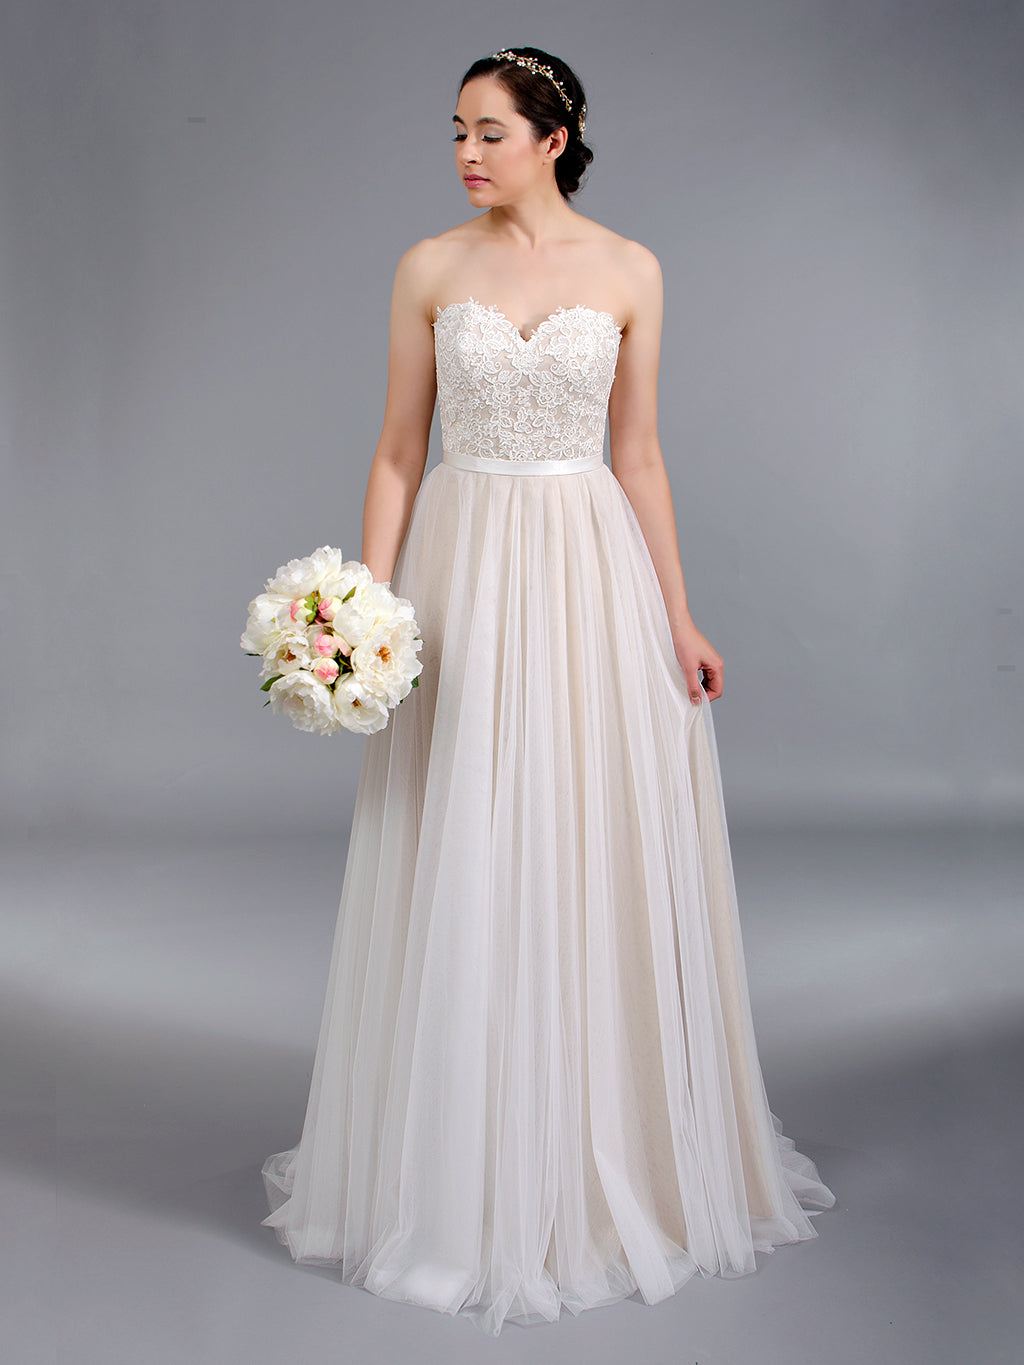 Ivory strapless lace wedding dress with tulle skirt 4052-wed